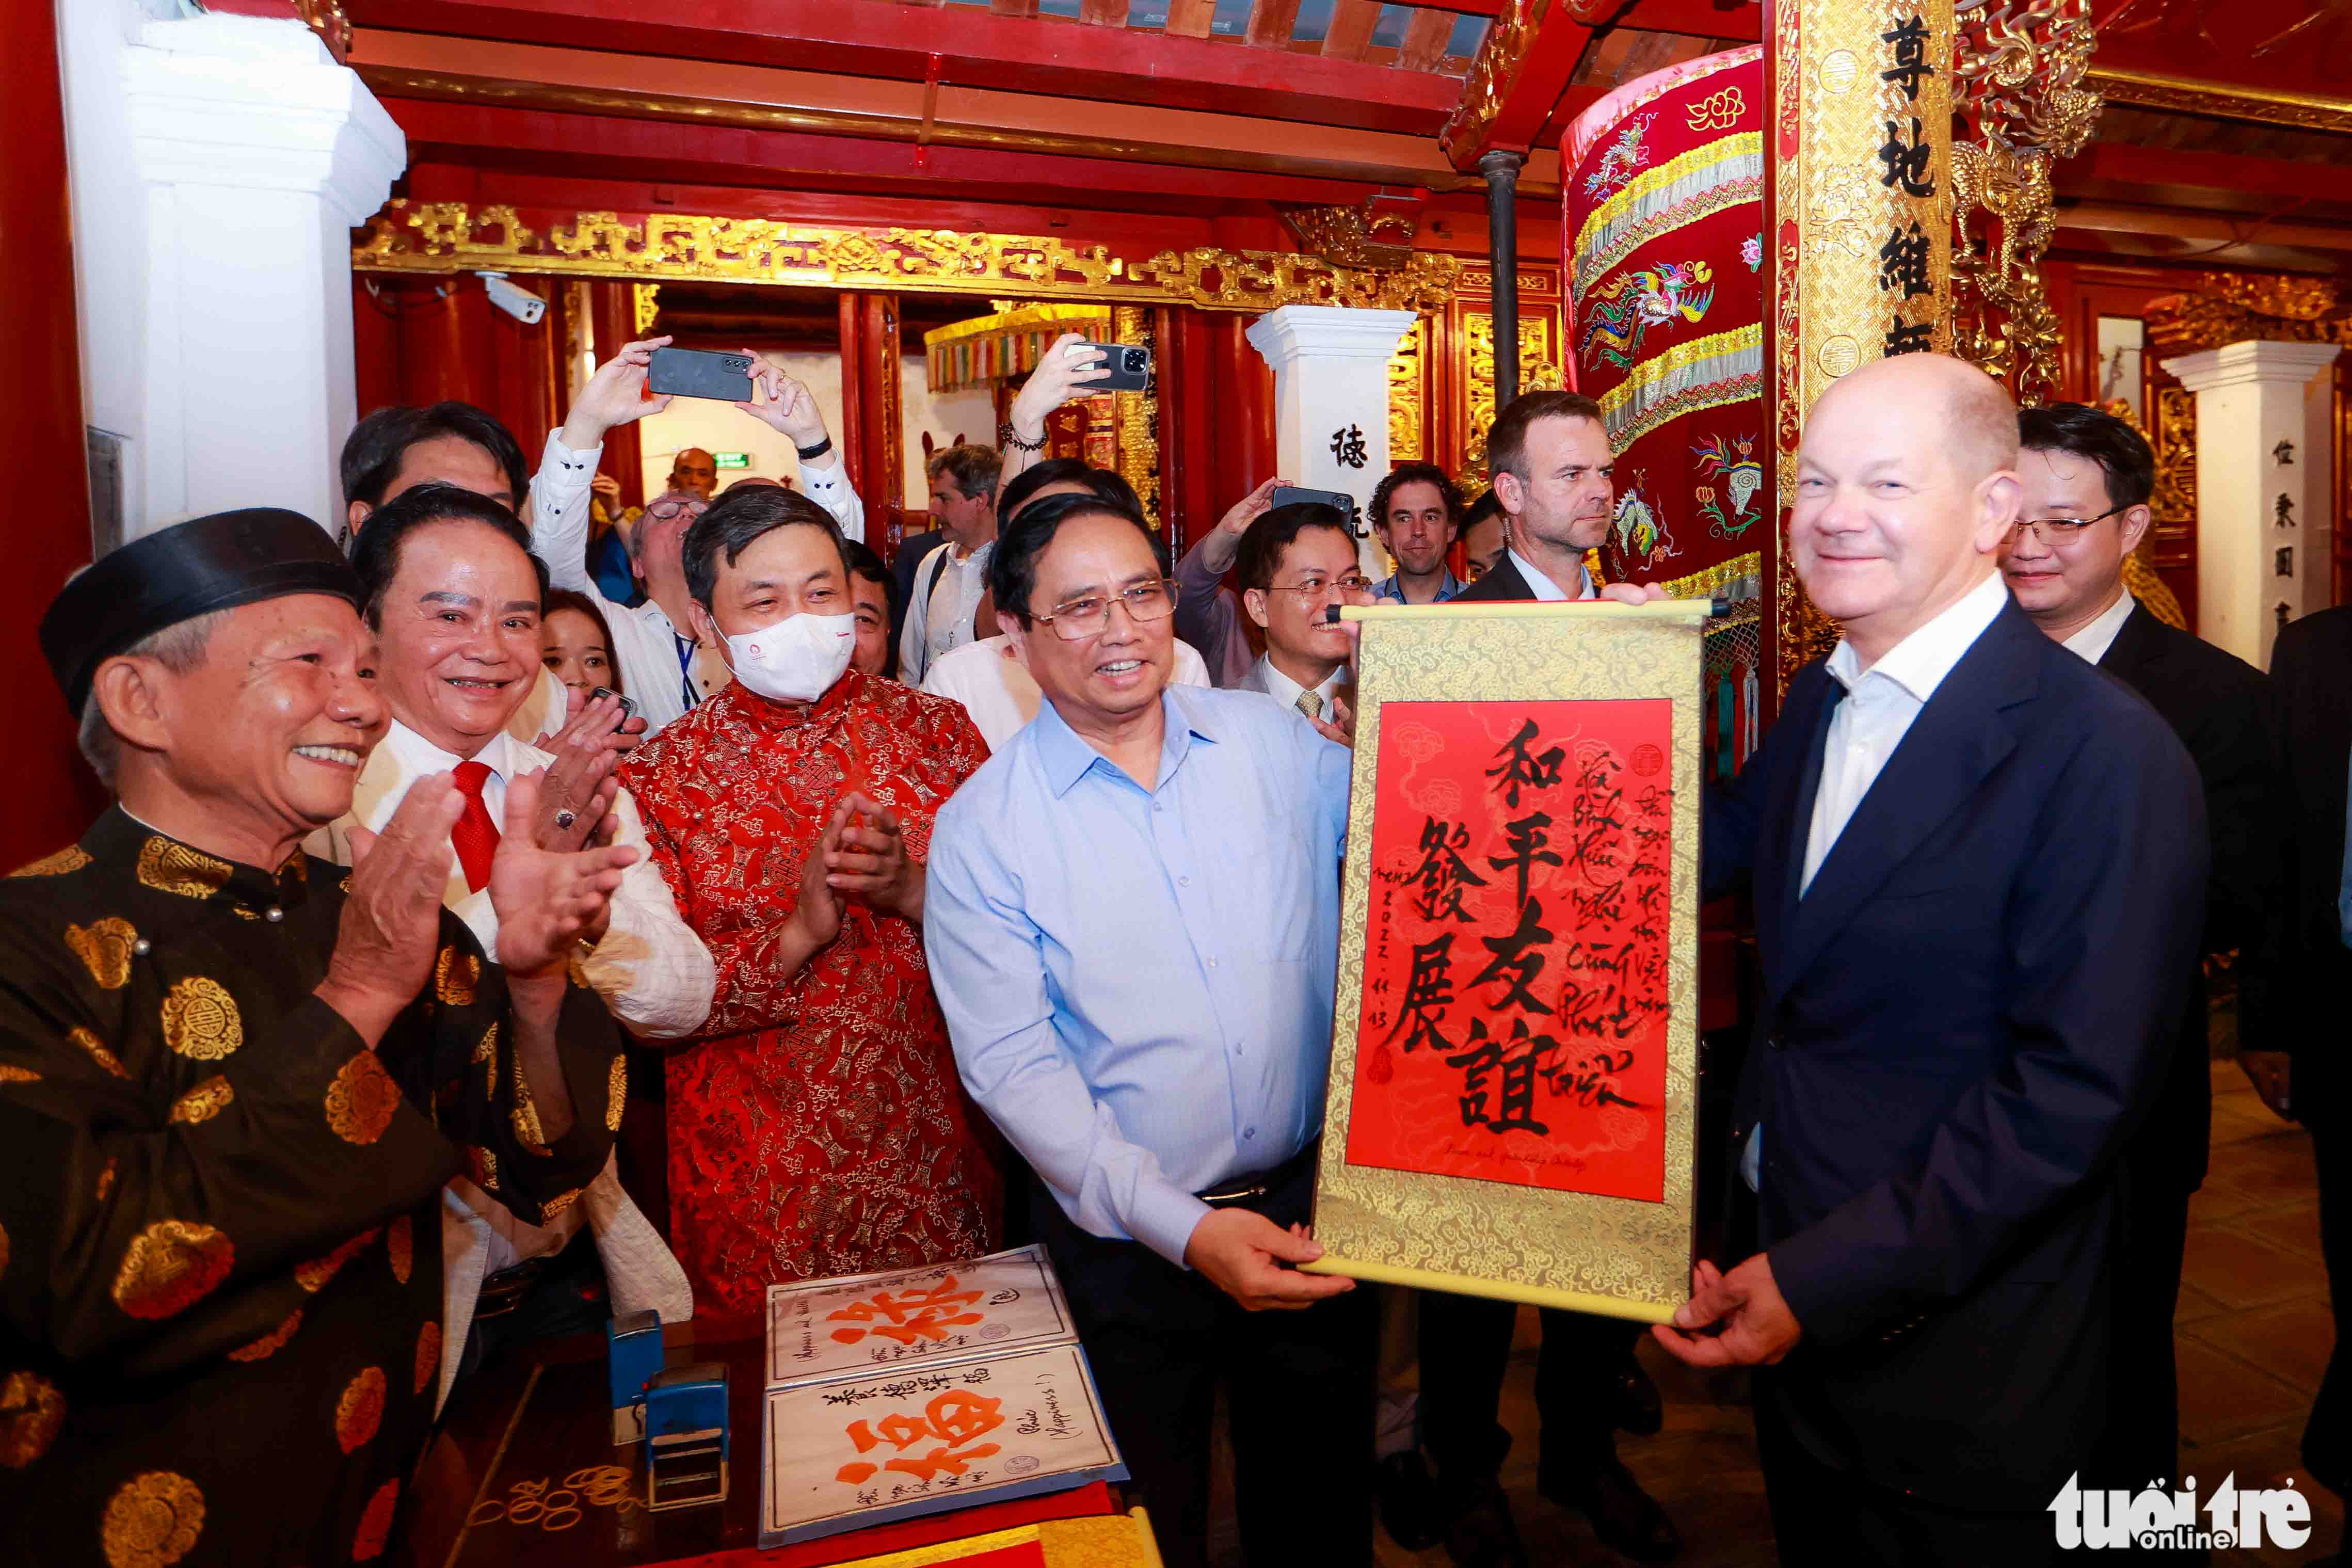 Chancellor Olaf Scholz is given a calligraphy at Ngoc Son Temple in Hanoi, November 13, 2022. Photo: Nguyen Khanh / Tuoi Tre